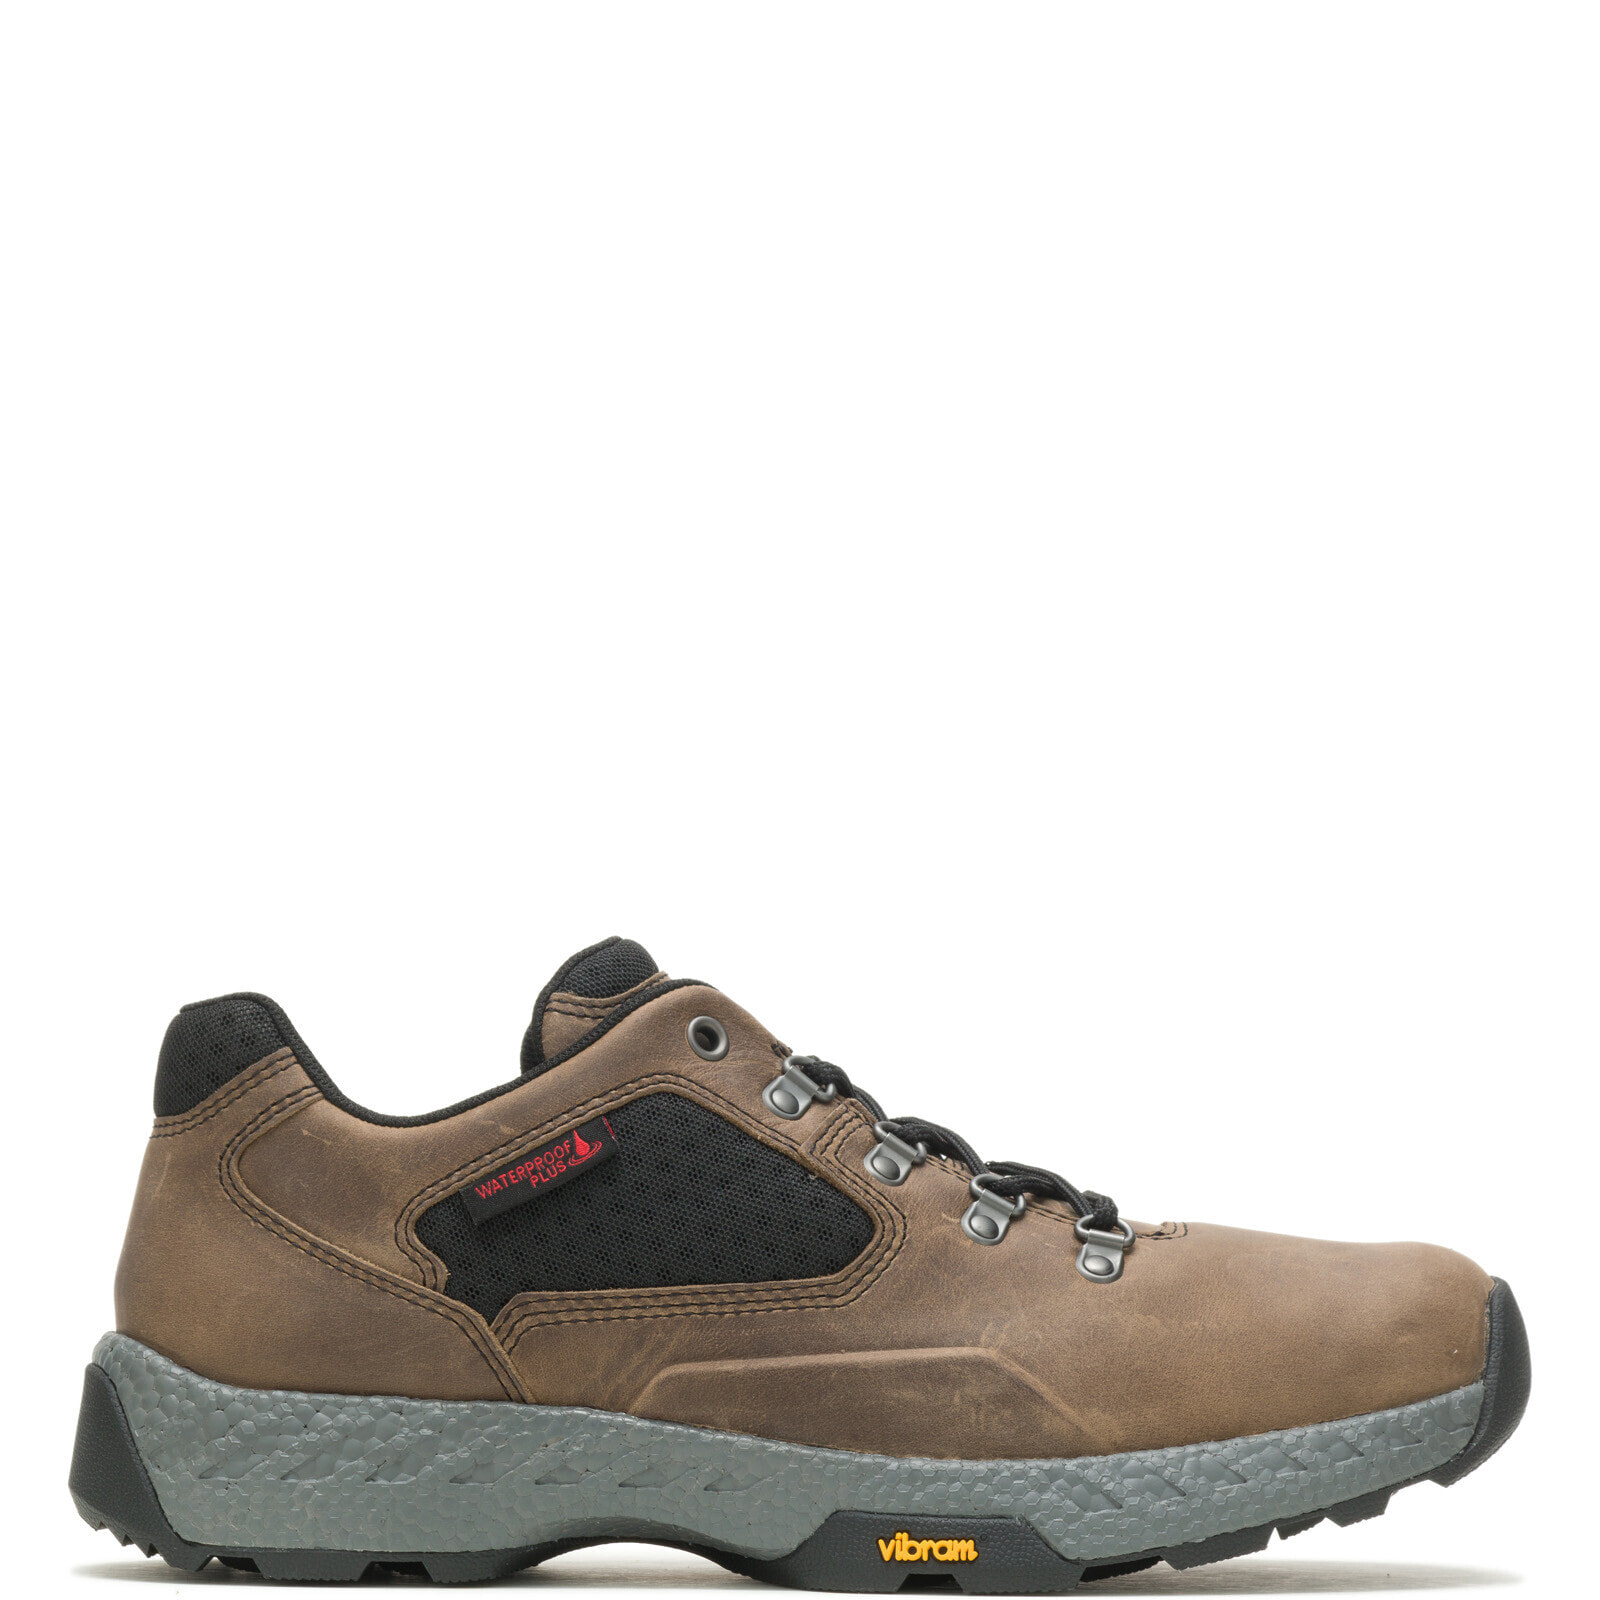 Wolverine Guide Ultraspring WP Low W880283 Mens Brown Athletic Work Shoes